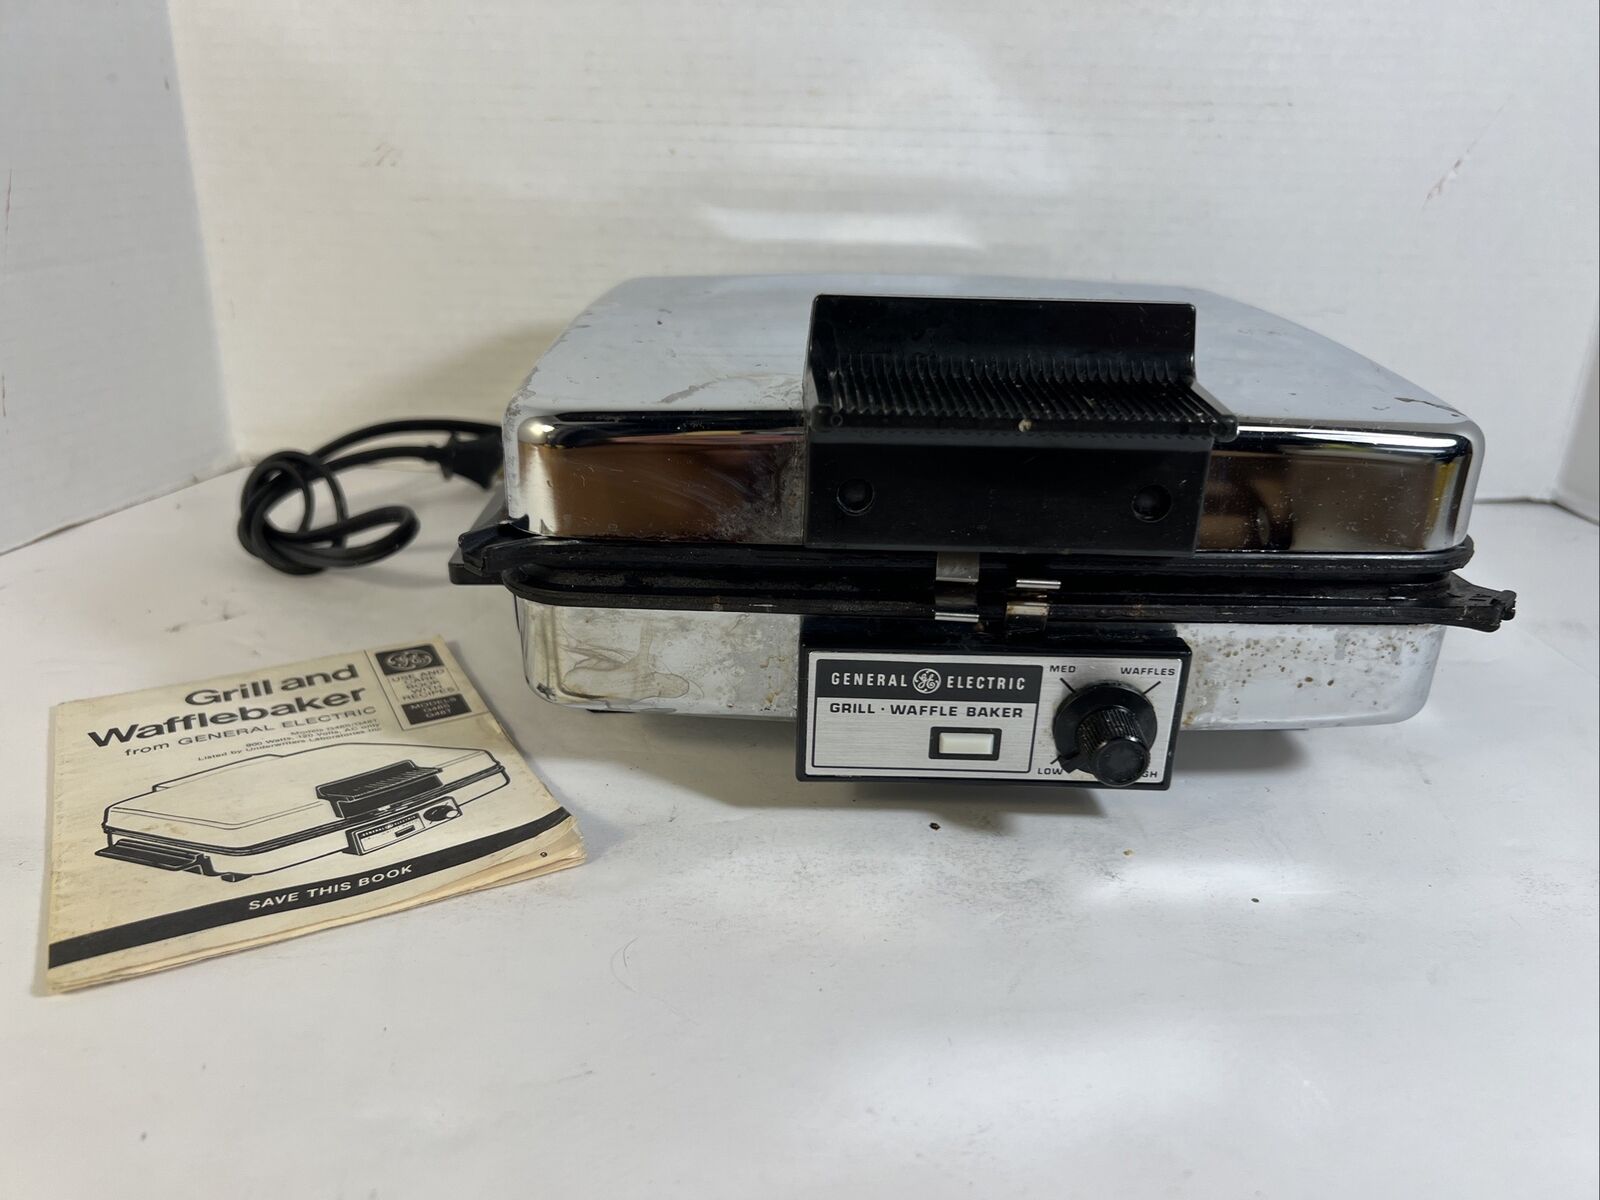 GE General Electric Chrome Waffle Baker Maker Grill A2G48T - Works